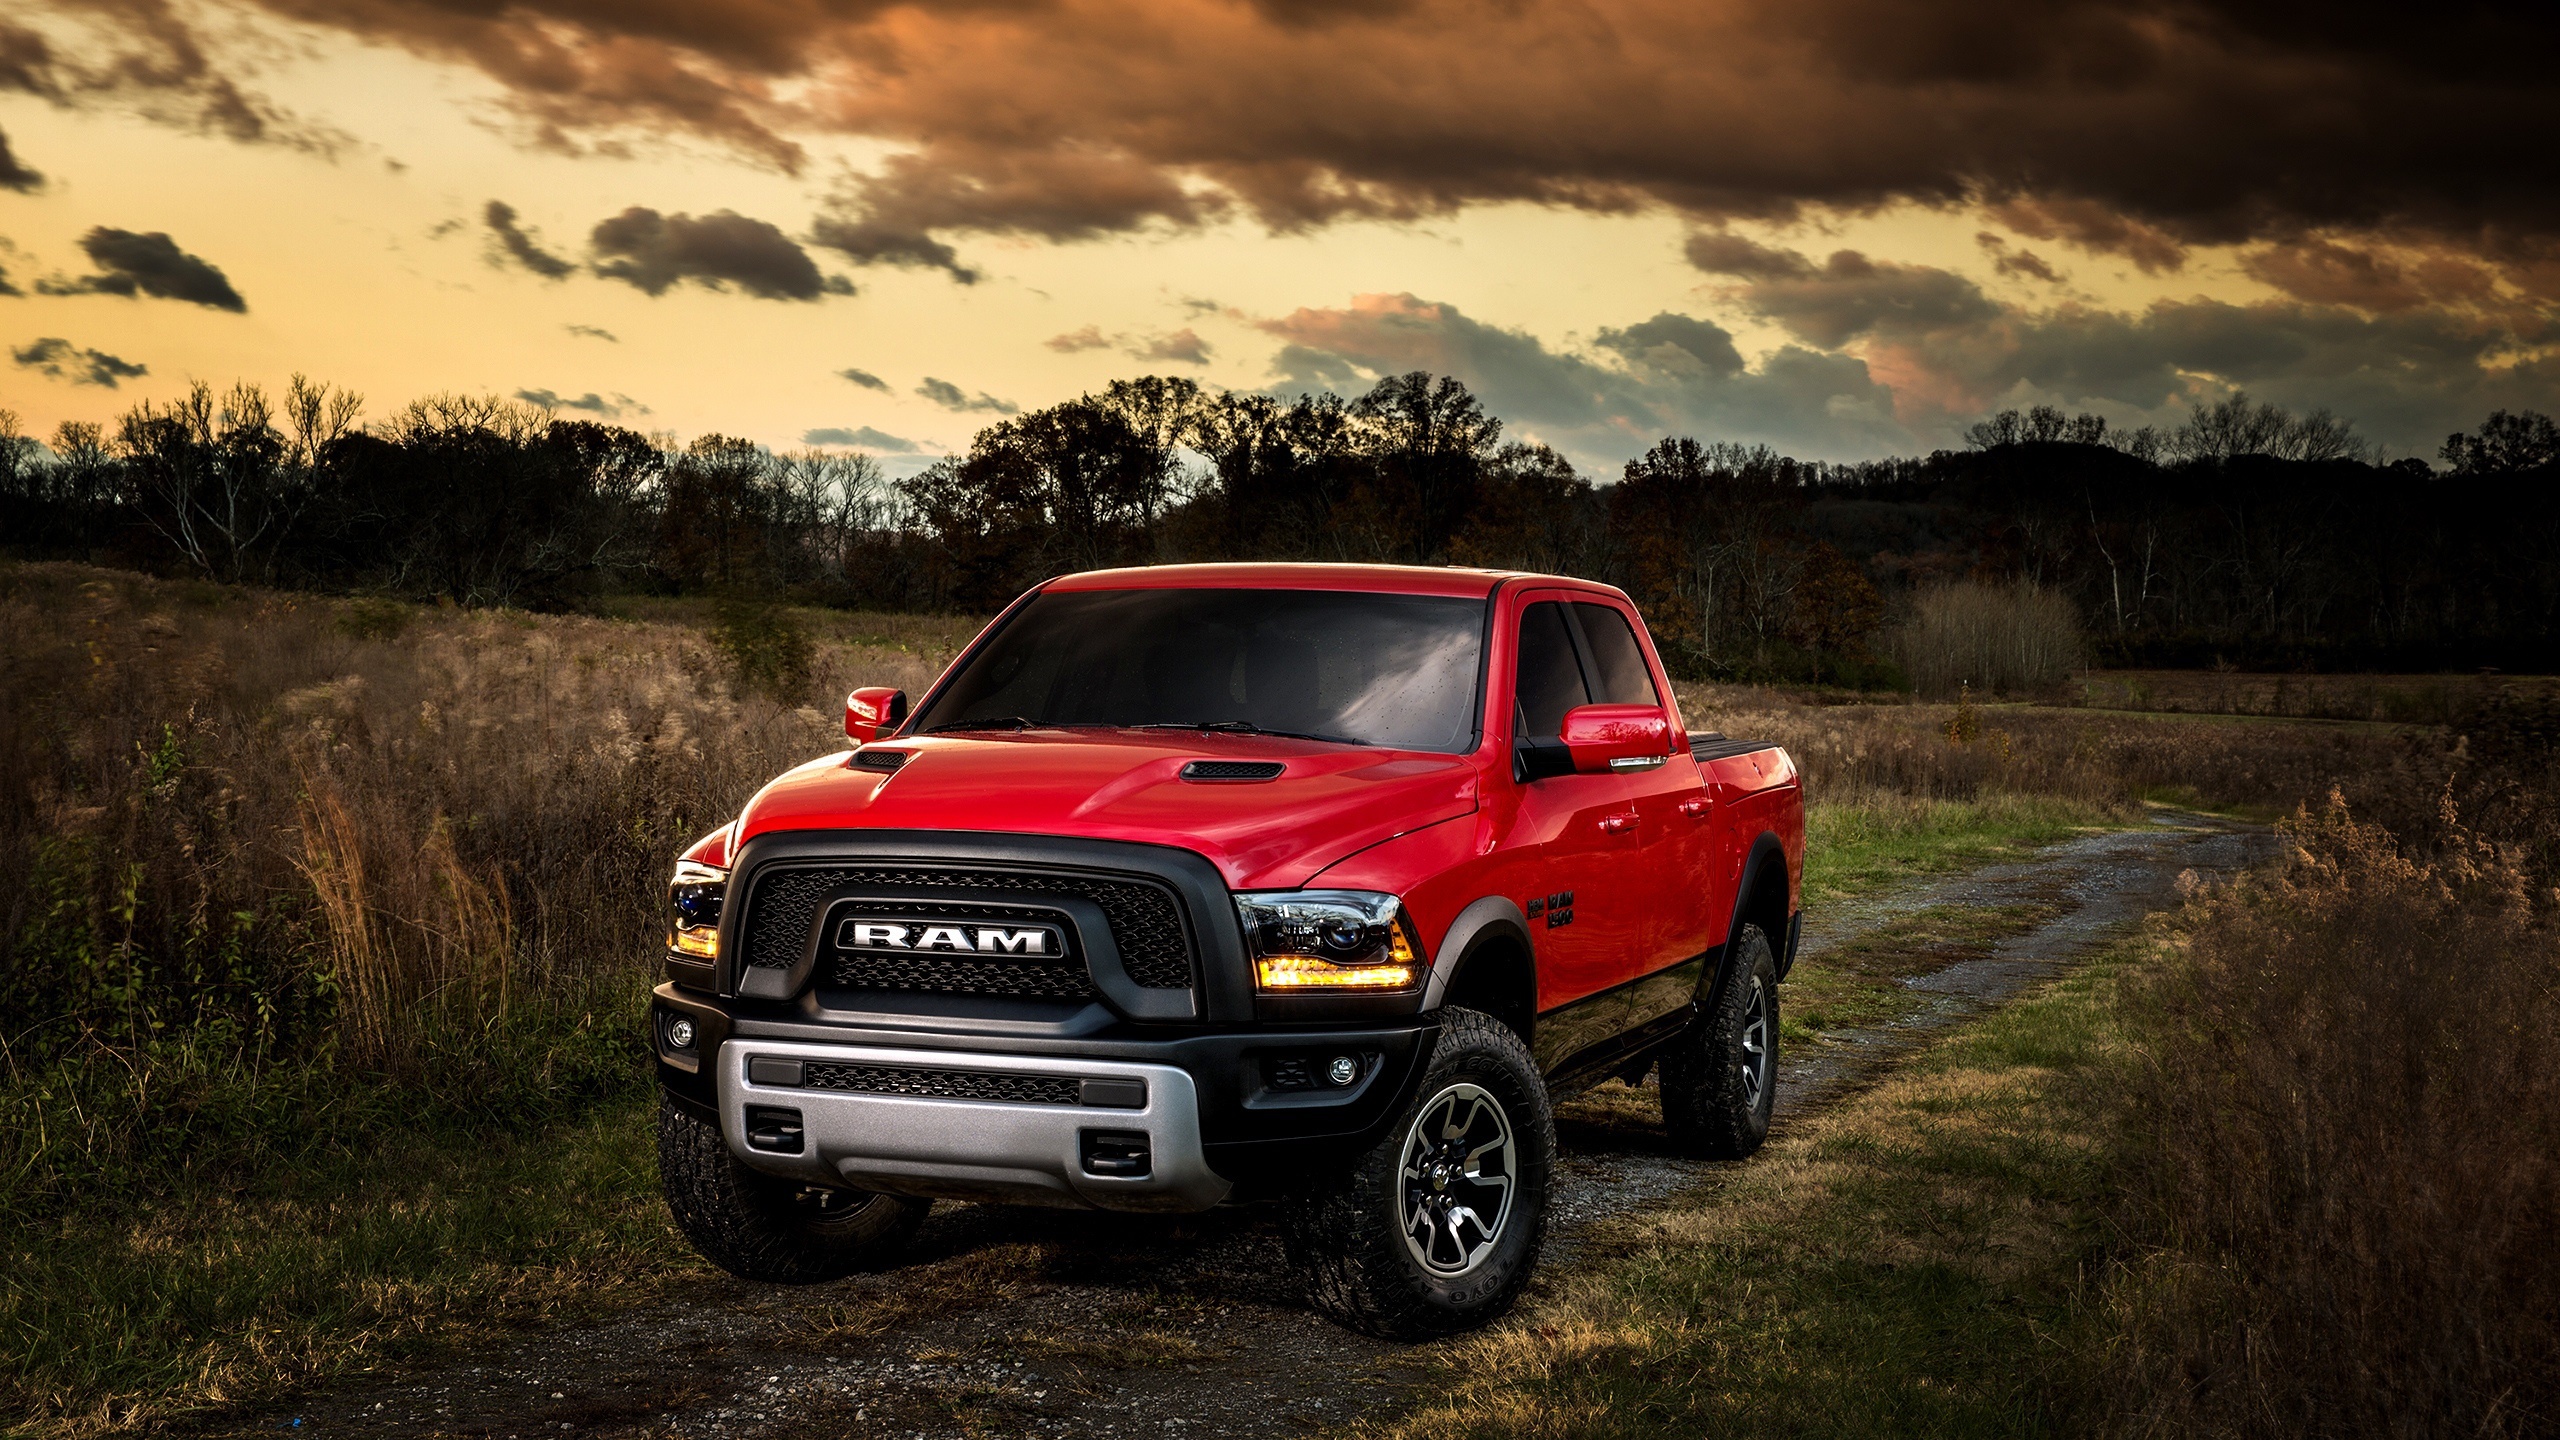 Ram Pickup Wallpapers Images Photos Pictures Backgrounds